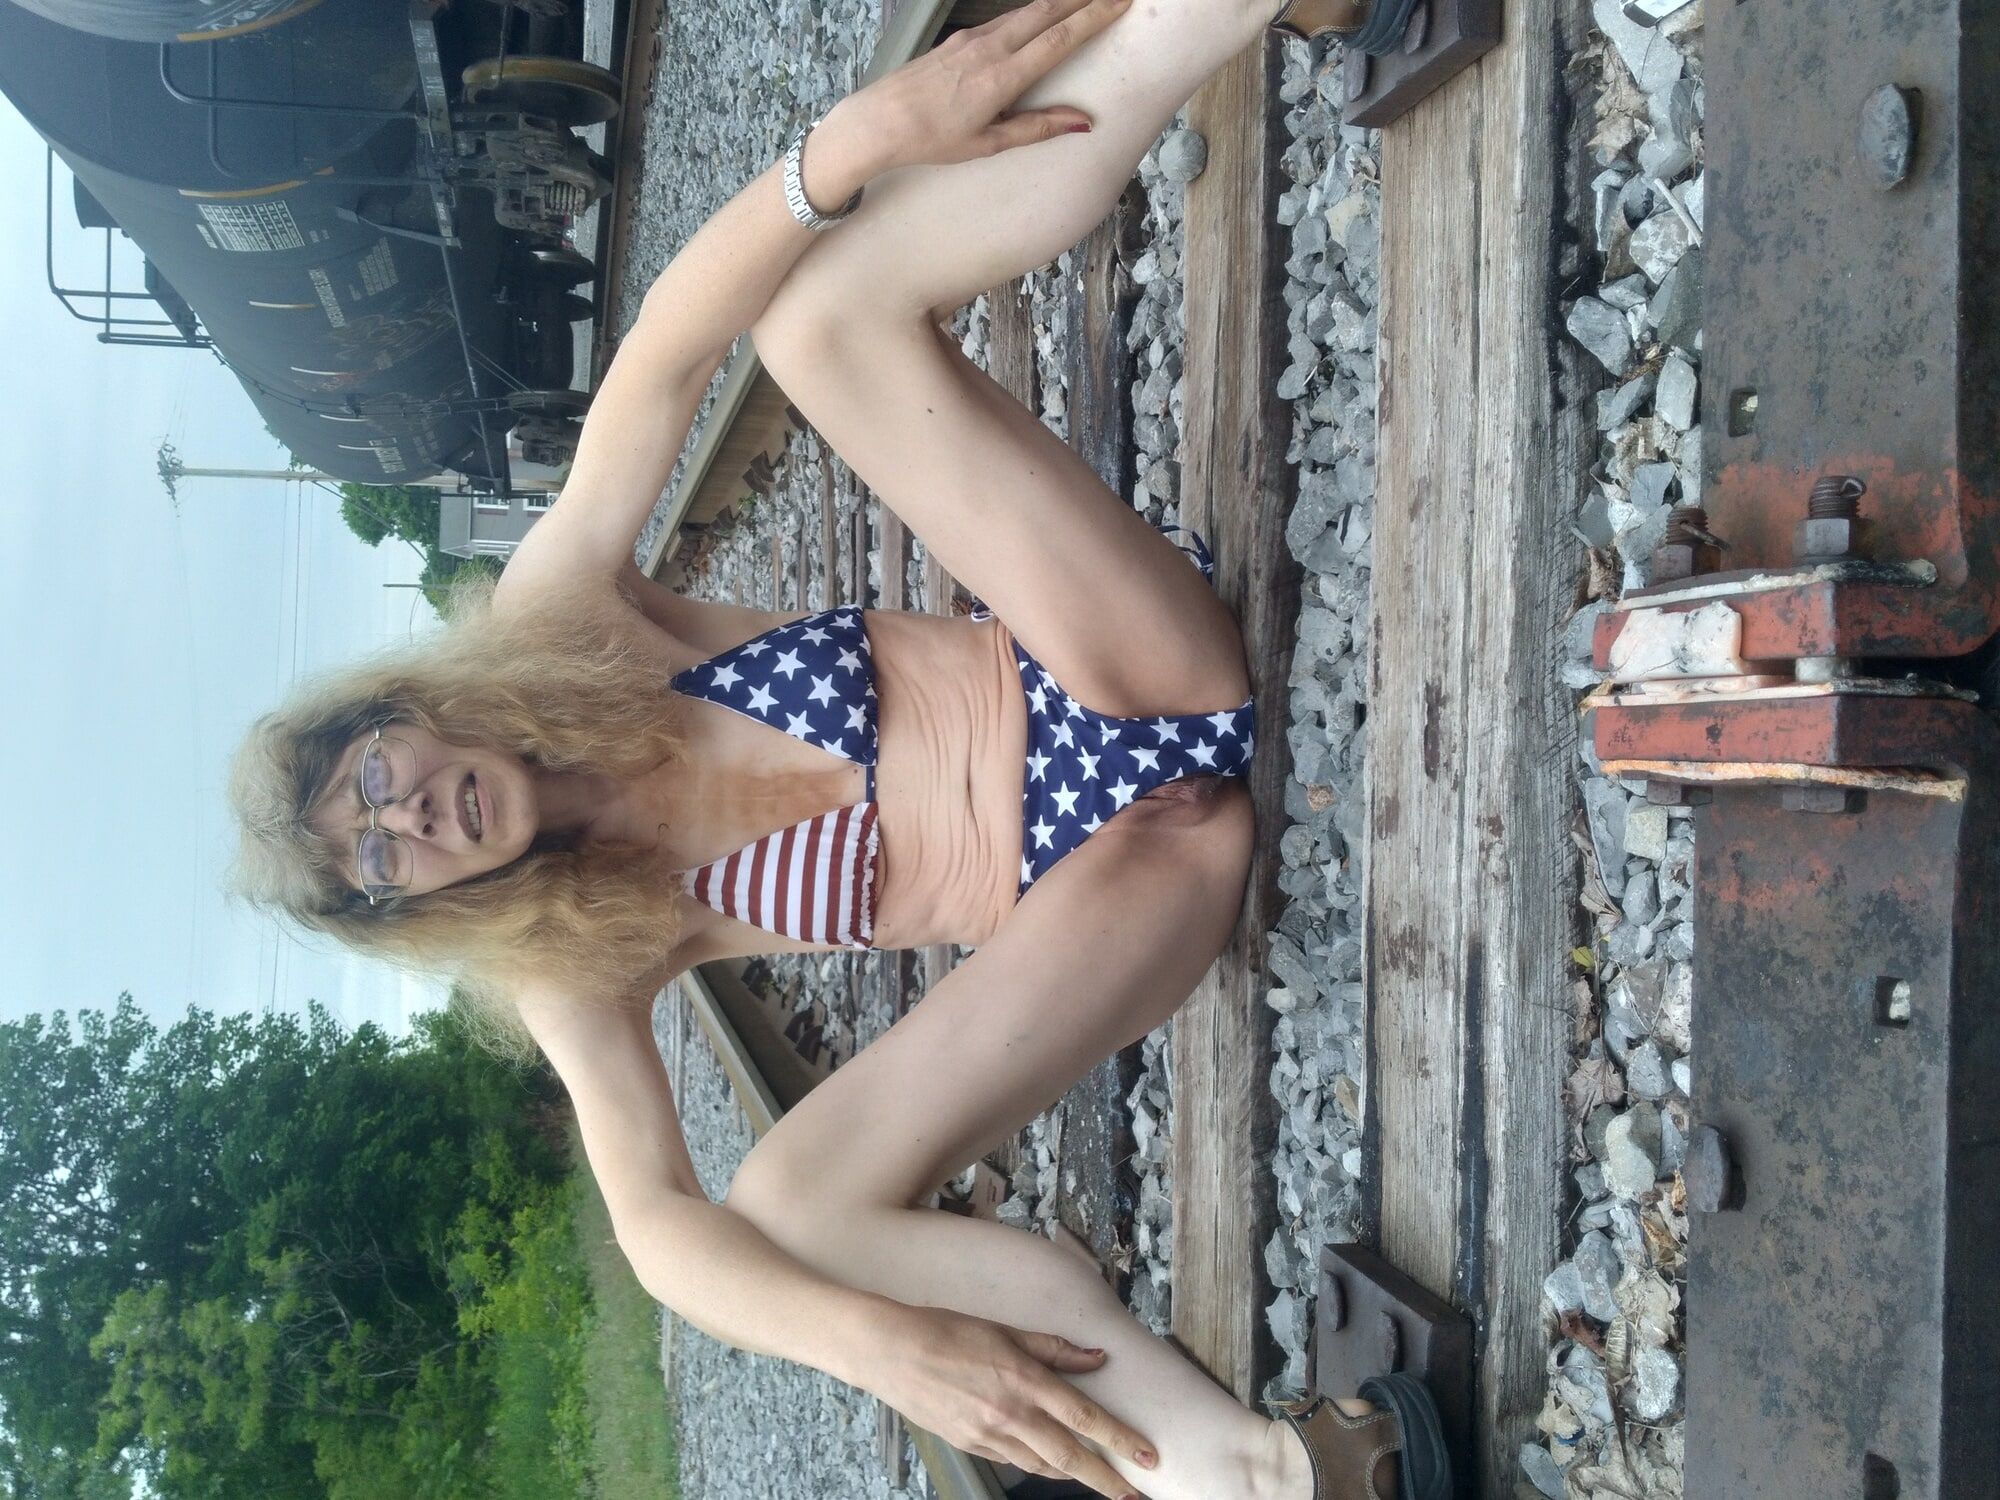 American Train. July 4th release. My best photo set to date. #29